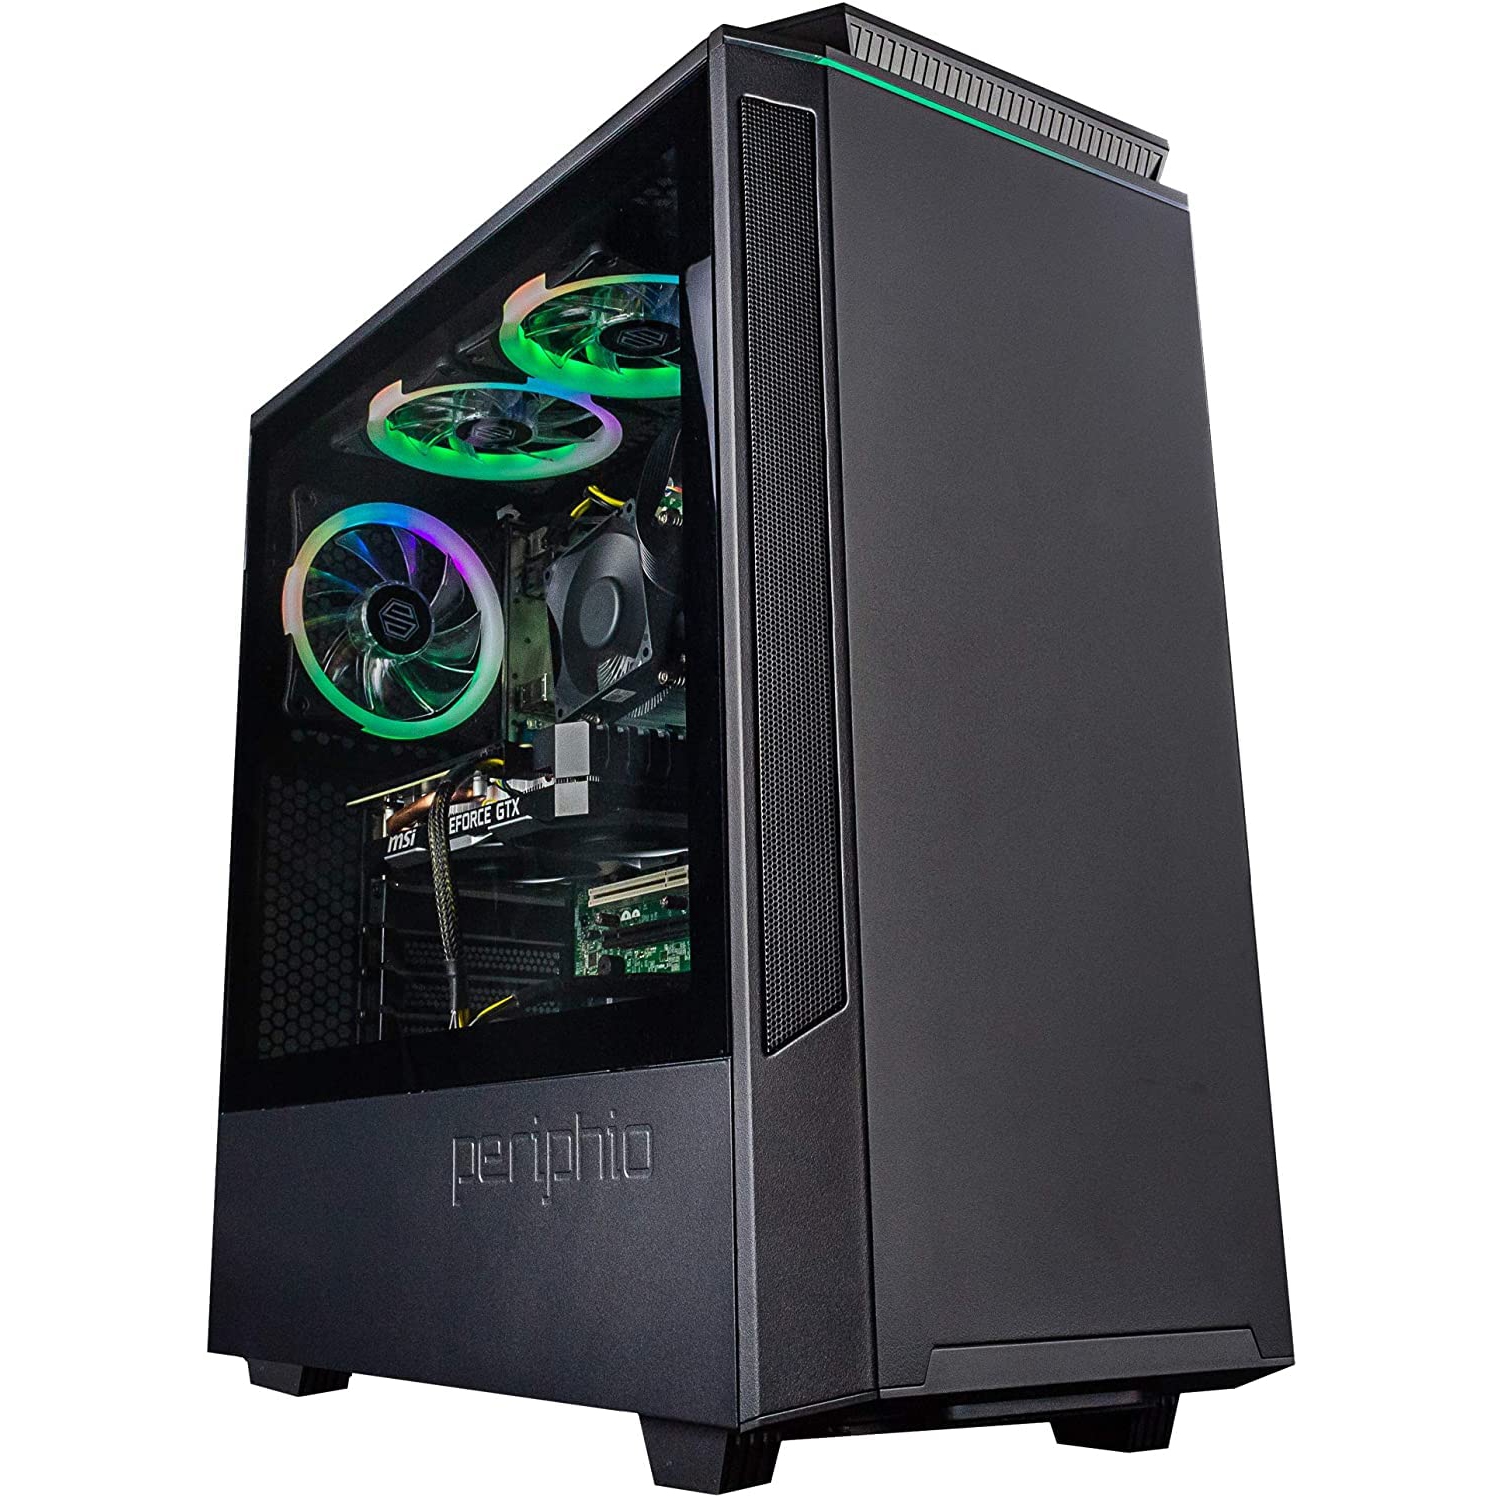 Refurbished (Excellent) - Periphio Ghoul | Prebuilt Gaming PC Computer | Intel i5 | NVIDIA GeForce GT 1030 Graphics Card | 16GB RAM | 120GB SSD + 500GB HDD | Windows 10